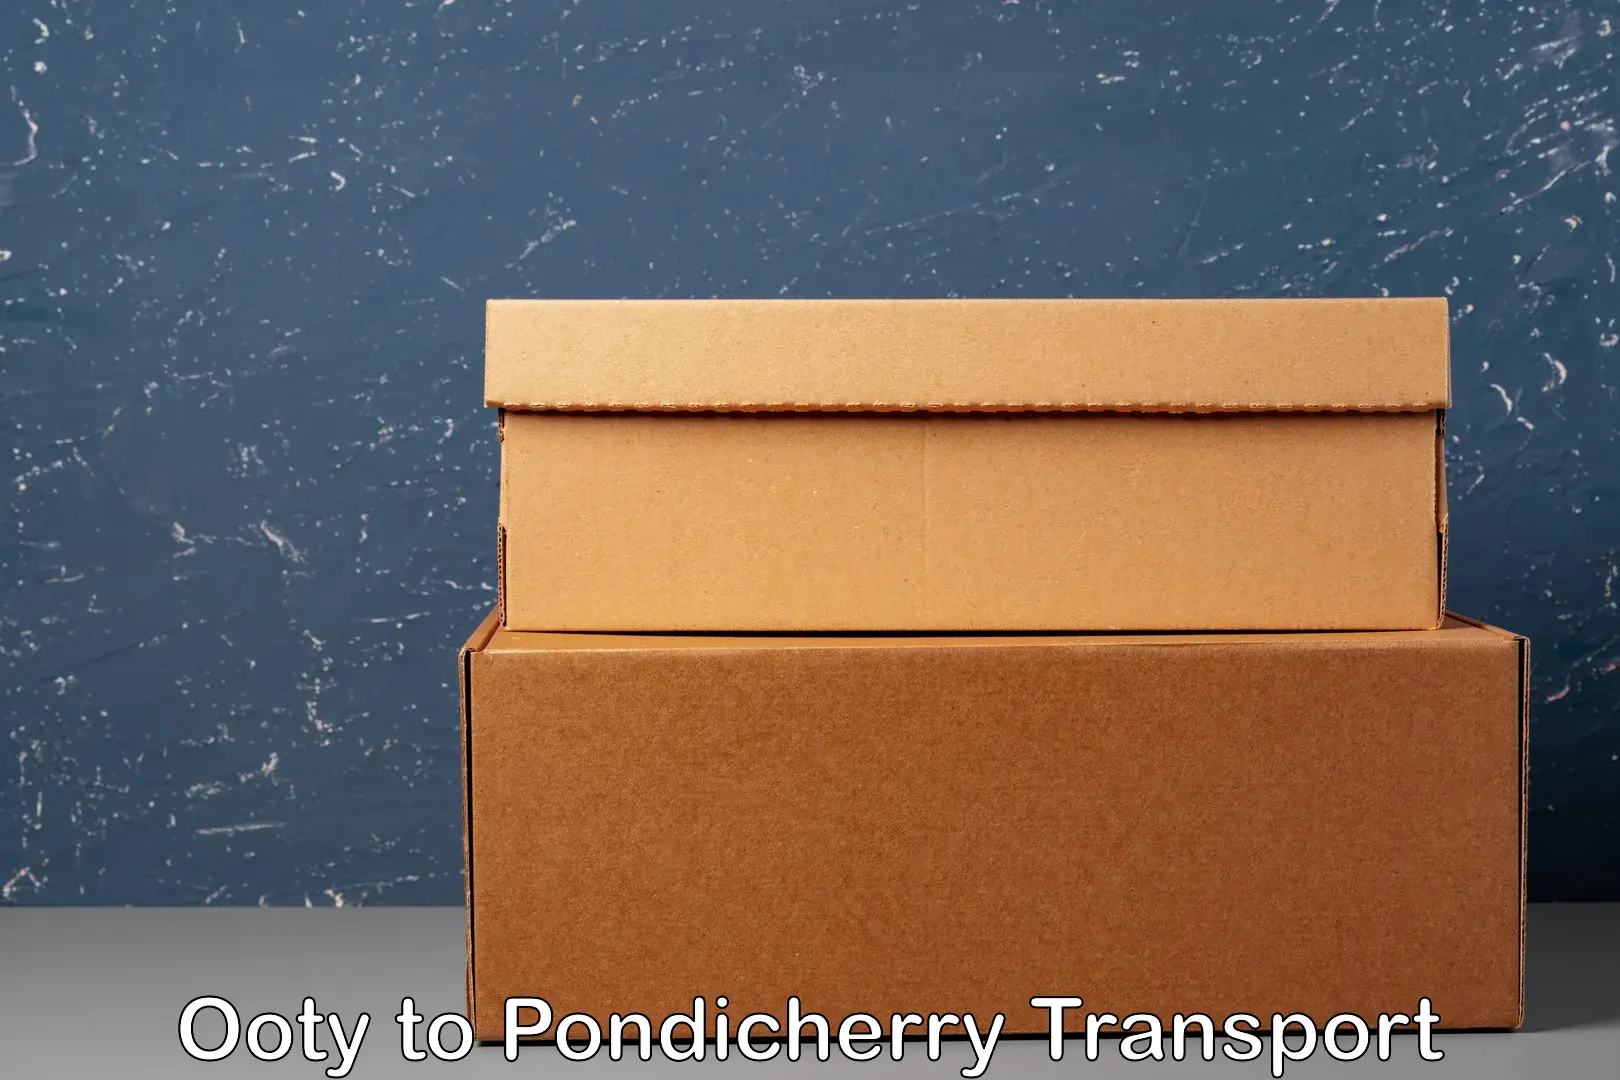 Parcel transport services Ooty to Pondicherry